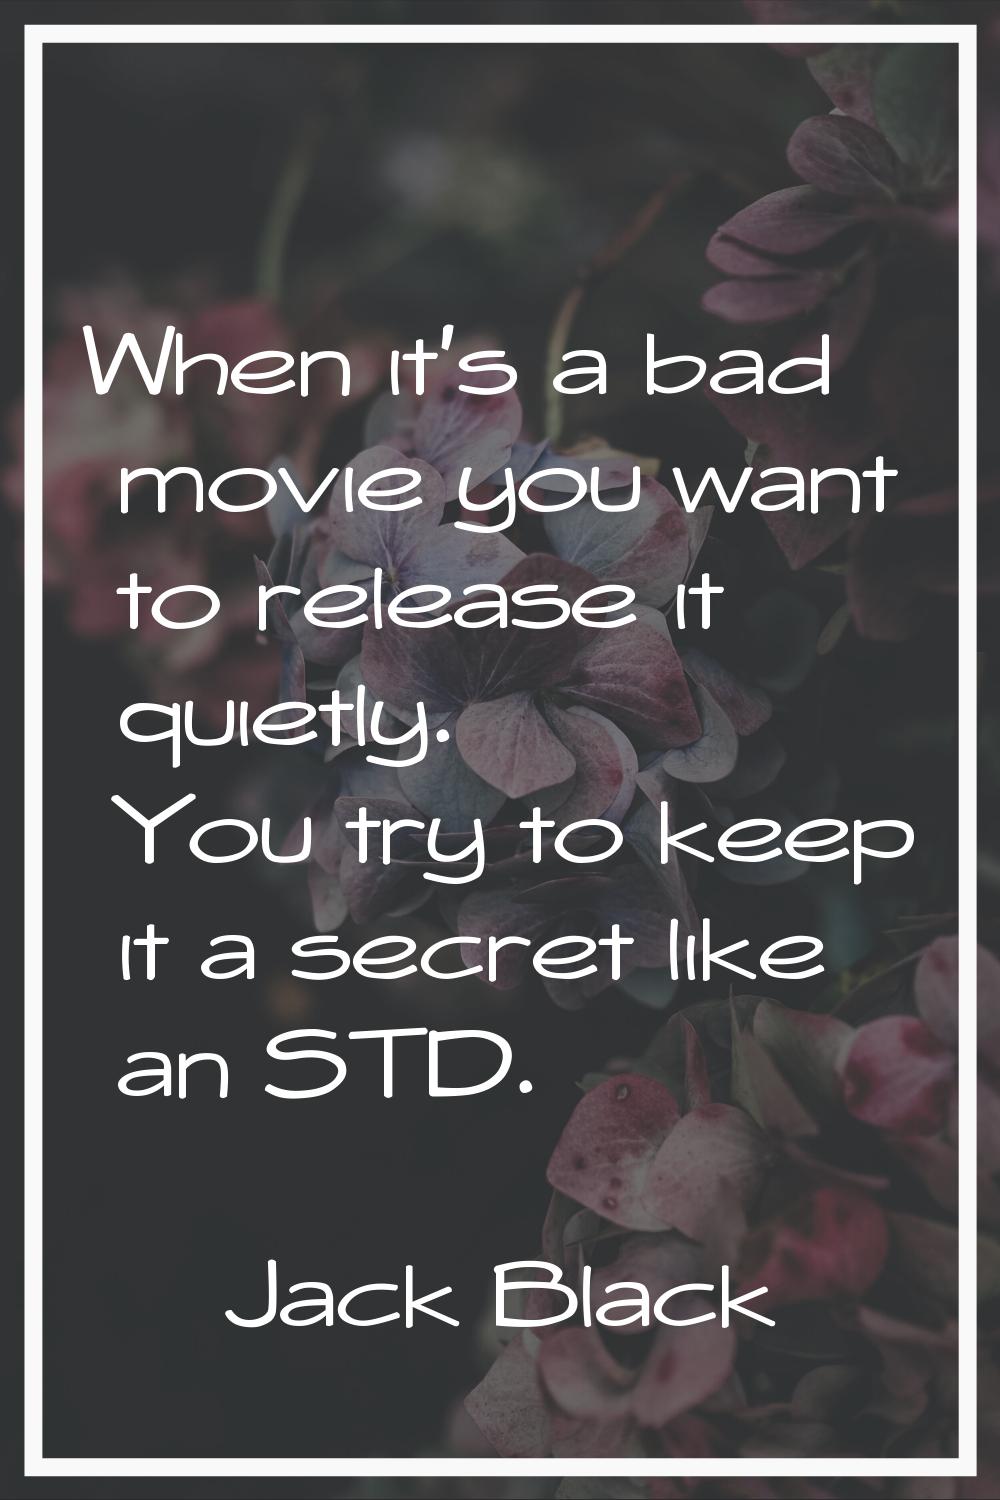 When it's a bad movie you want to release it quietly. You try to keep it a secret like an STD.